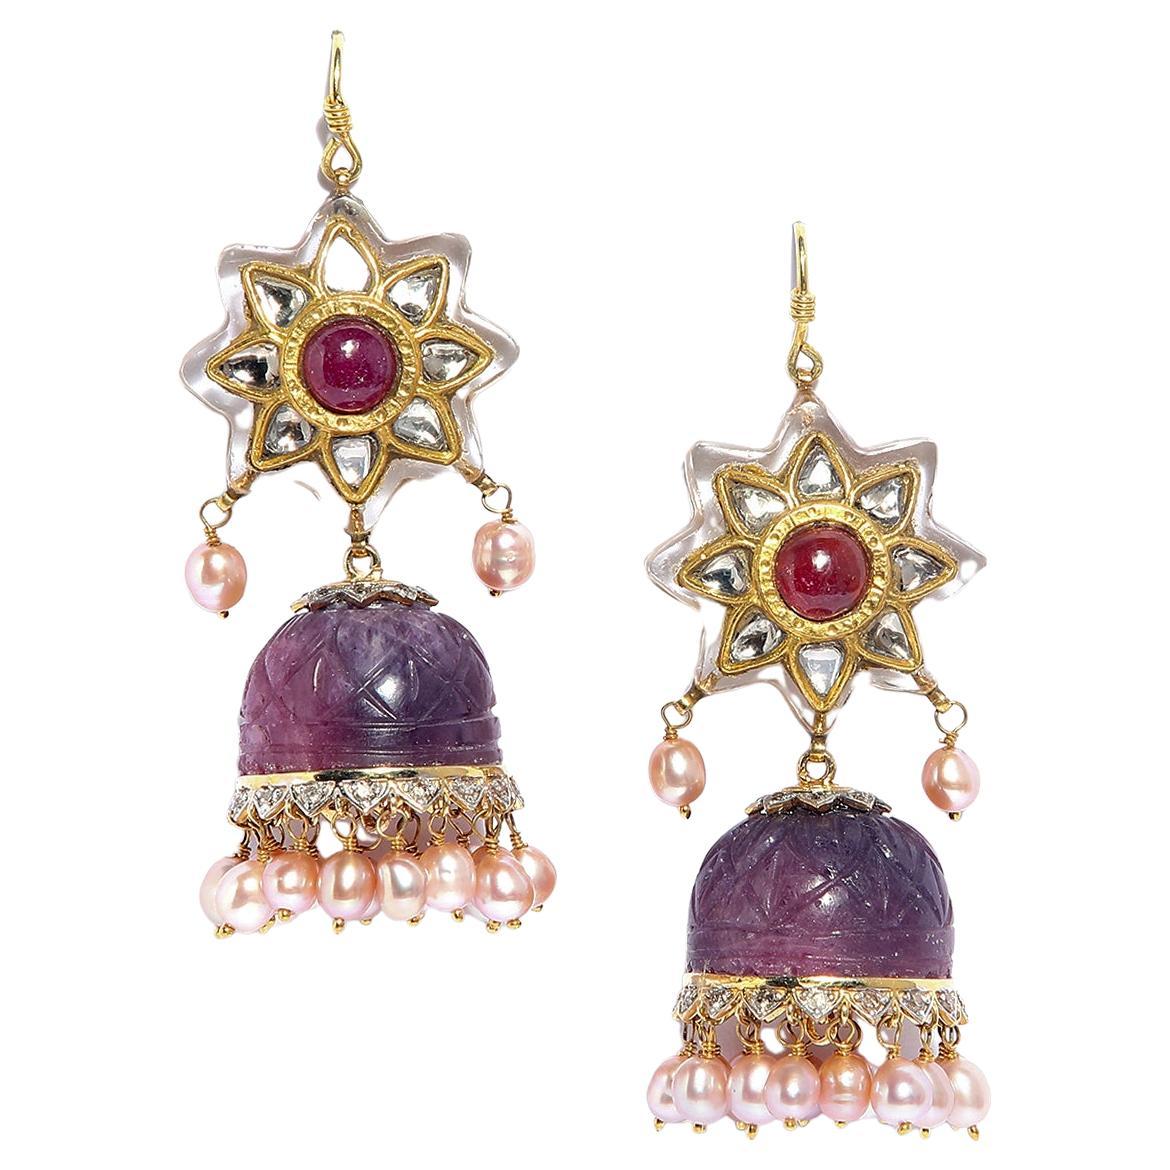 Rock crystal jhumkas by Vintage Intention